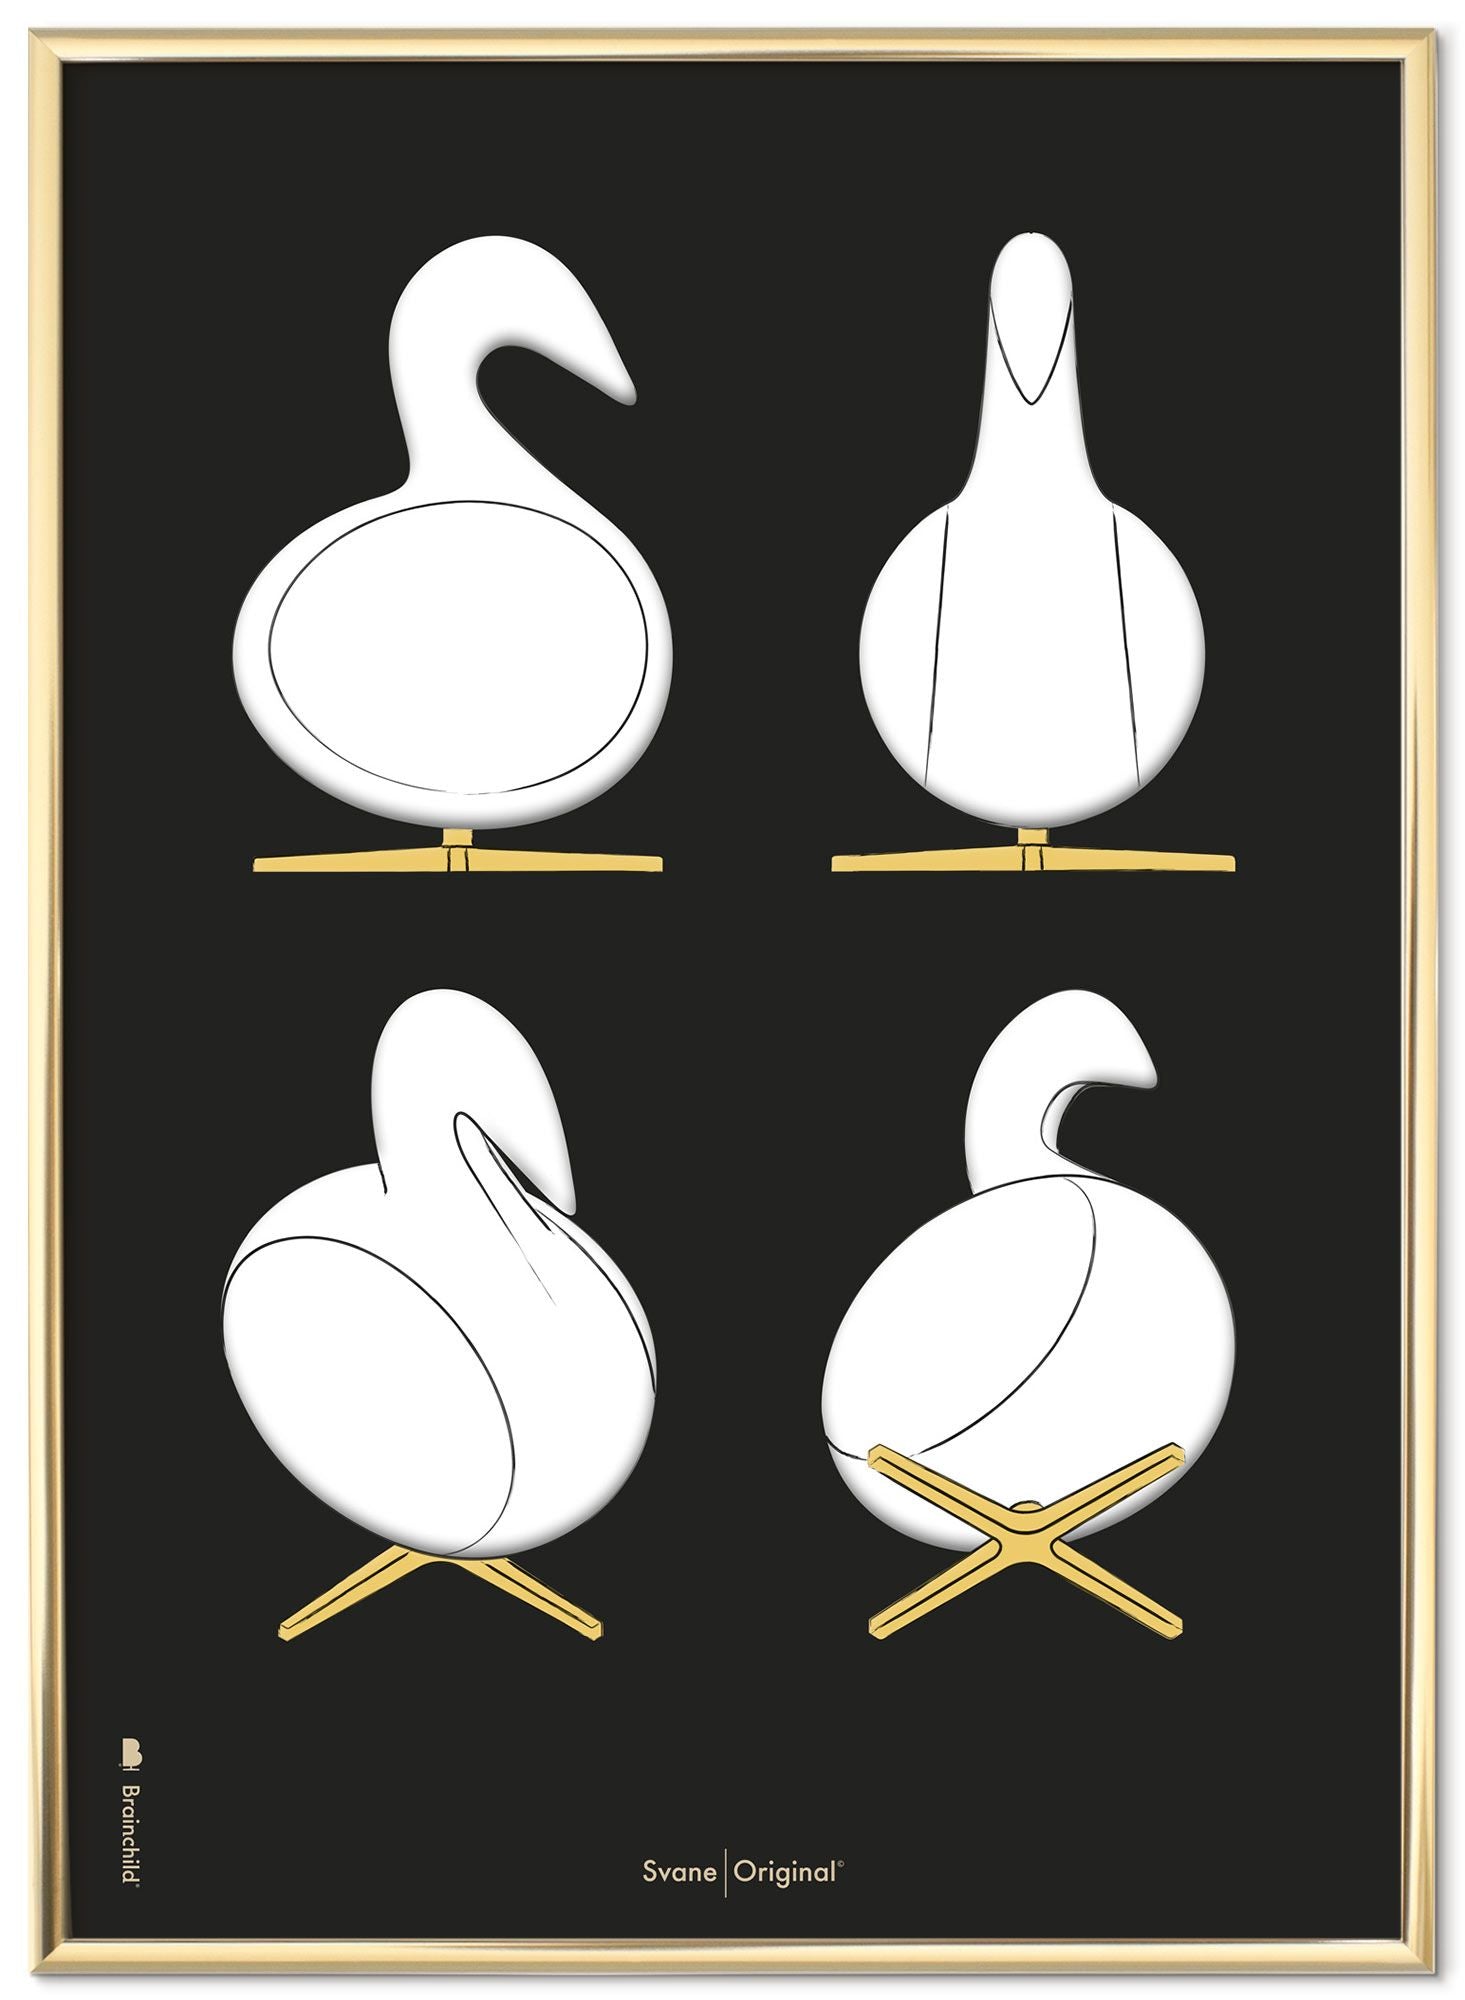 Brainchild Swan Design Sketches Poster Frame Made Of Brass Colored Metal 50x70 Cm, Black Background